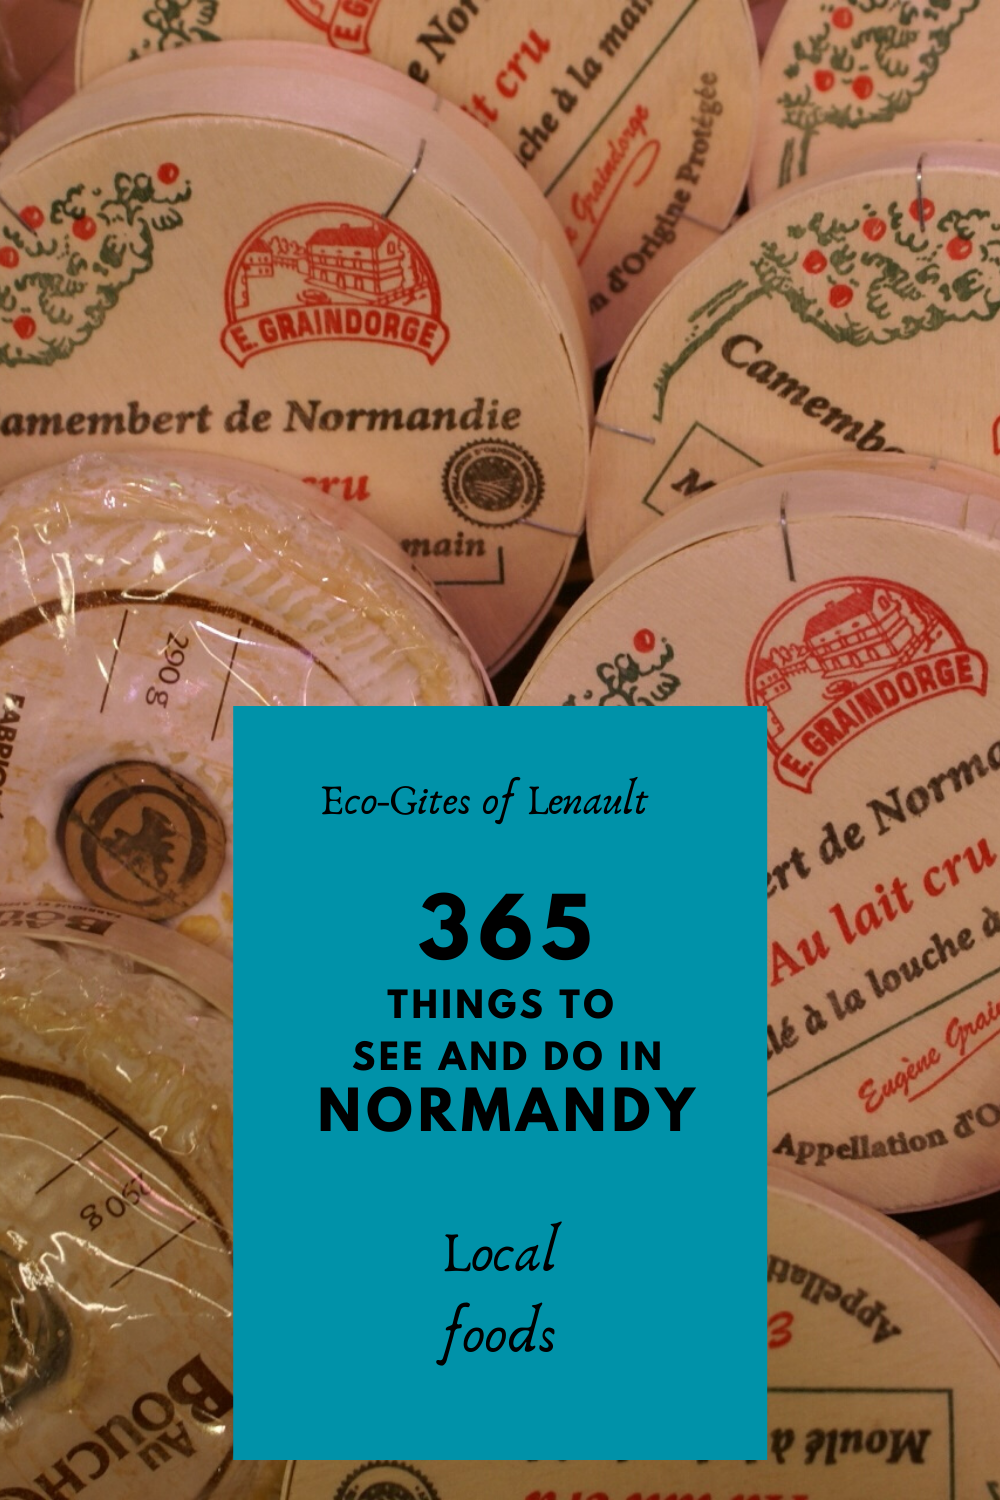 7 Normandy foods to try